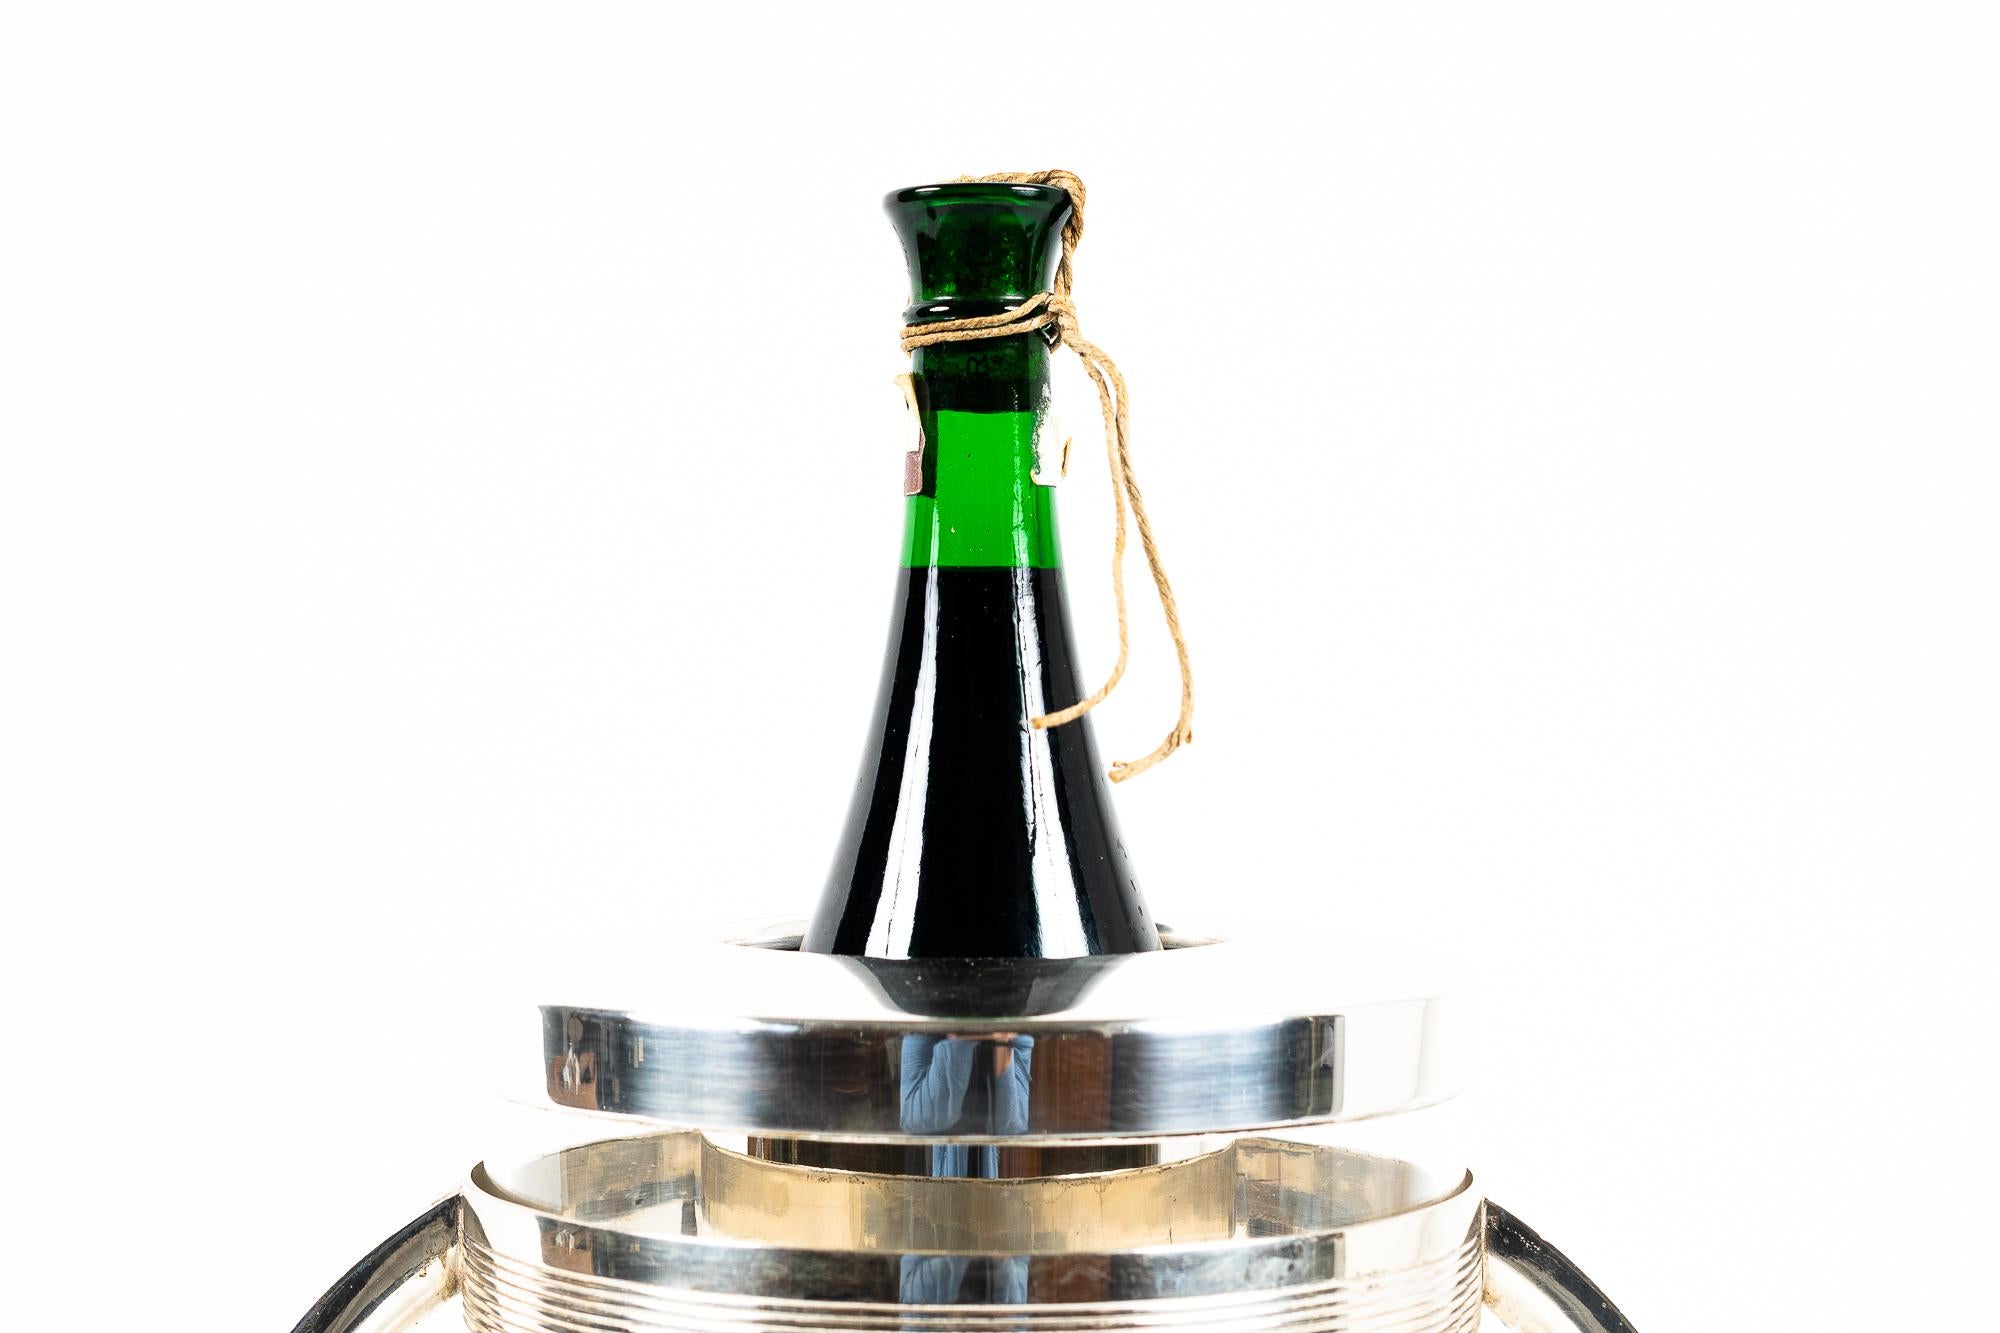 Art Deco champagne silver-plated alpaca bucket Vienna around 1920
Diameter without handles: 19cm
Diameter with the handles: 28cm
The maximum width for a bottle is: 9,3cm ( 3,66 in )
Original condition
(The bottle is only for the photoshoot and